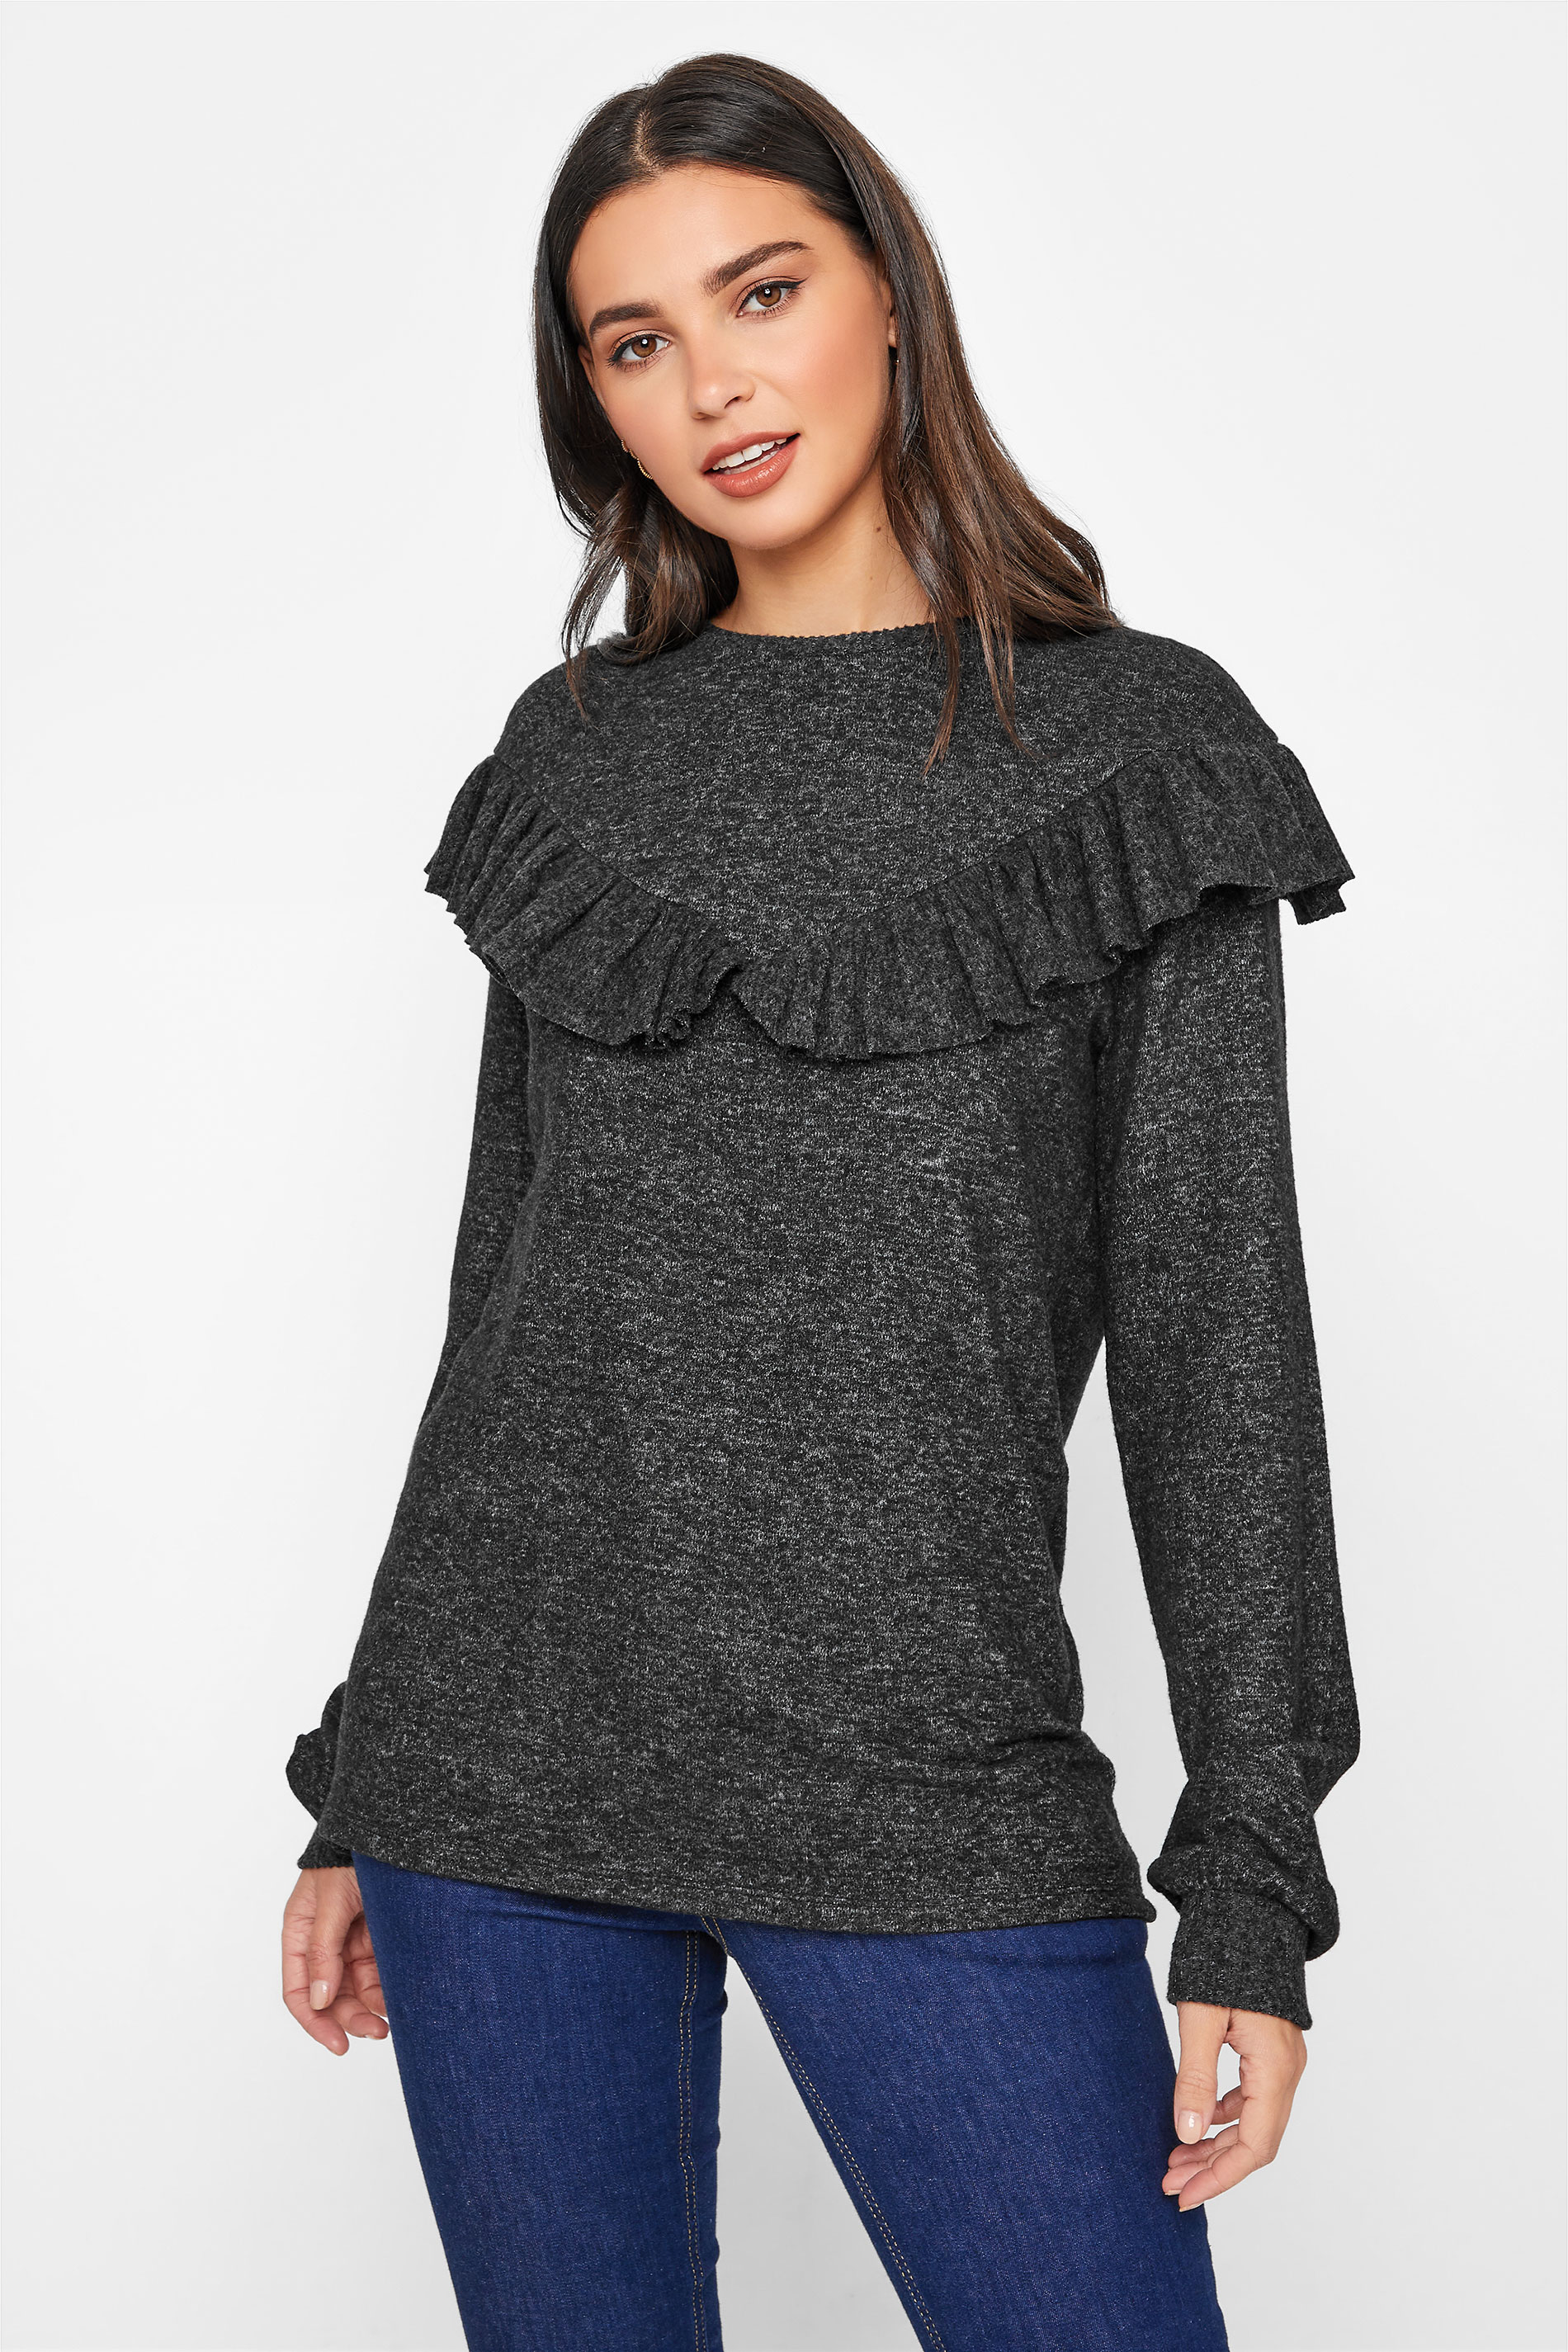 LTS Tall Grey Soft Touch Frill Top 1